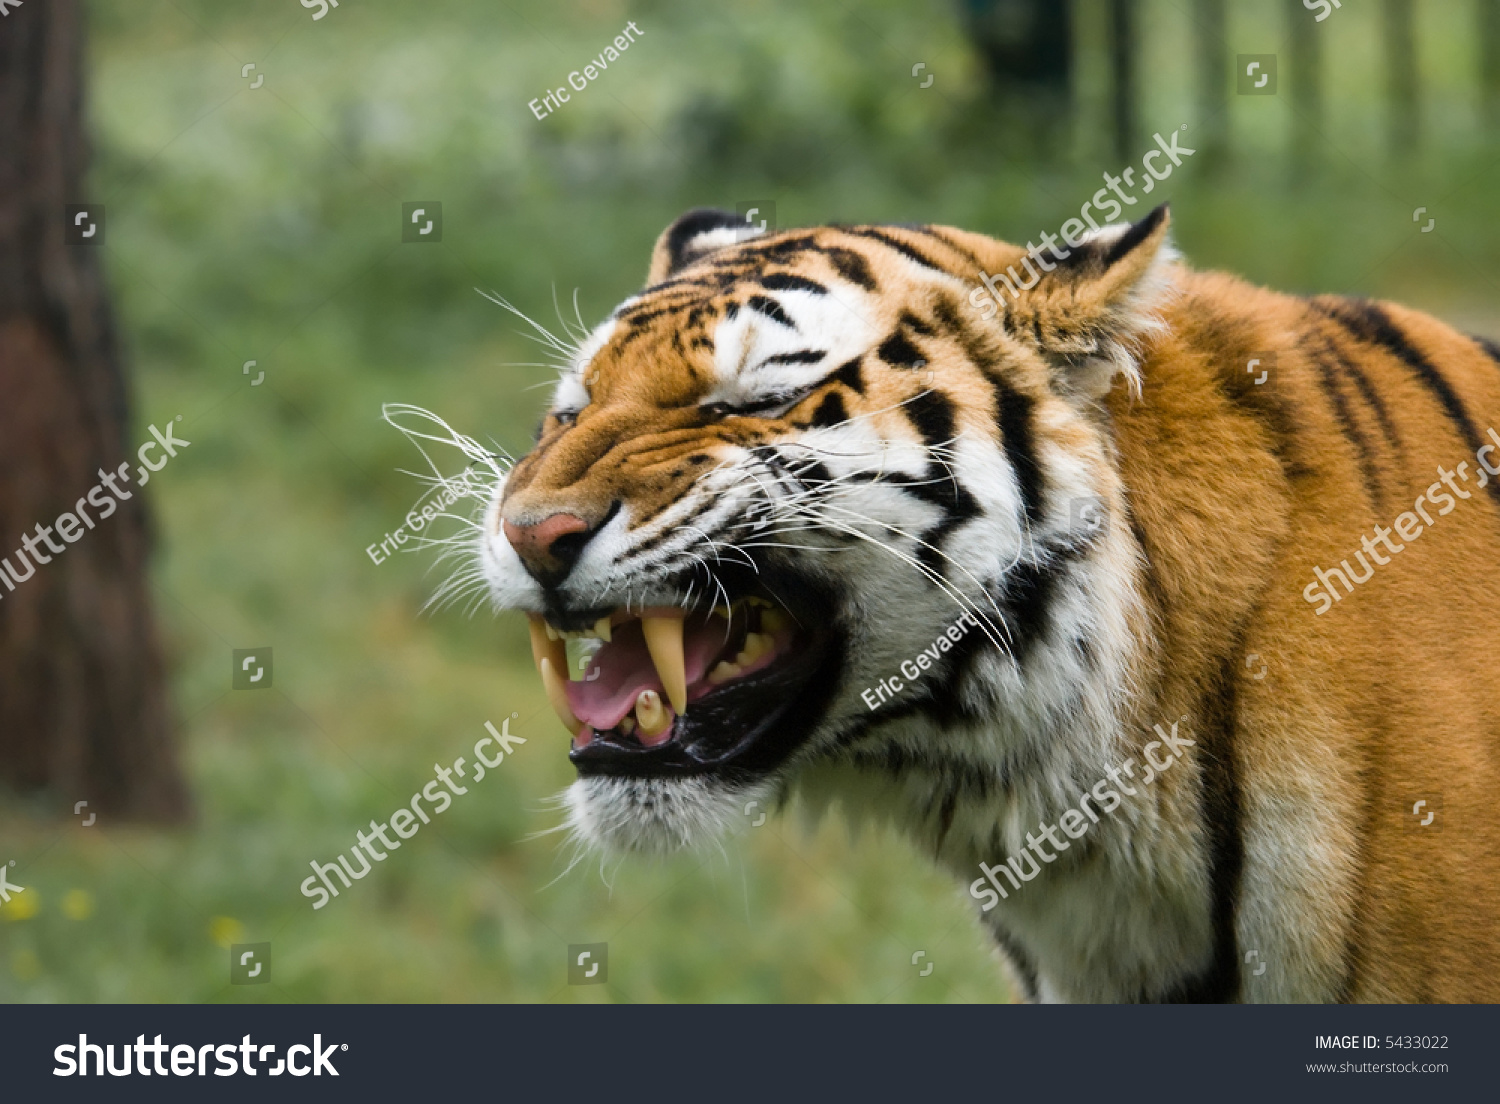 Angry Tiger Showing Big Sharp Teeth Stock Photo 5433022 - Shutterstock